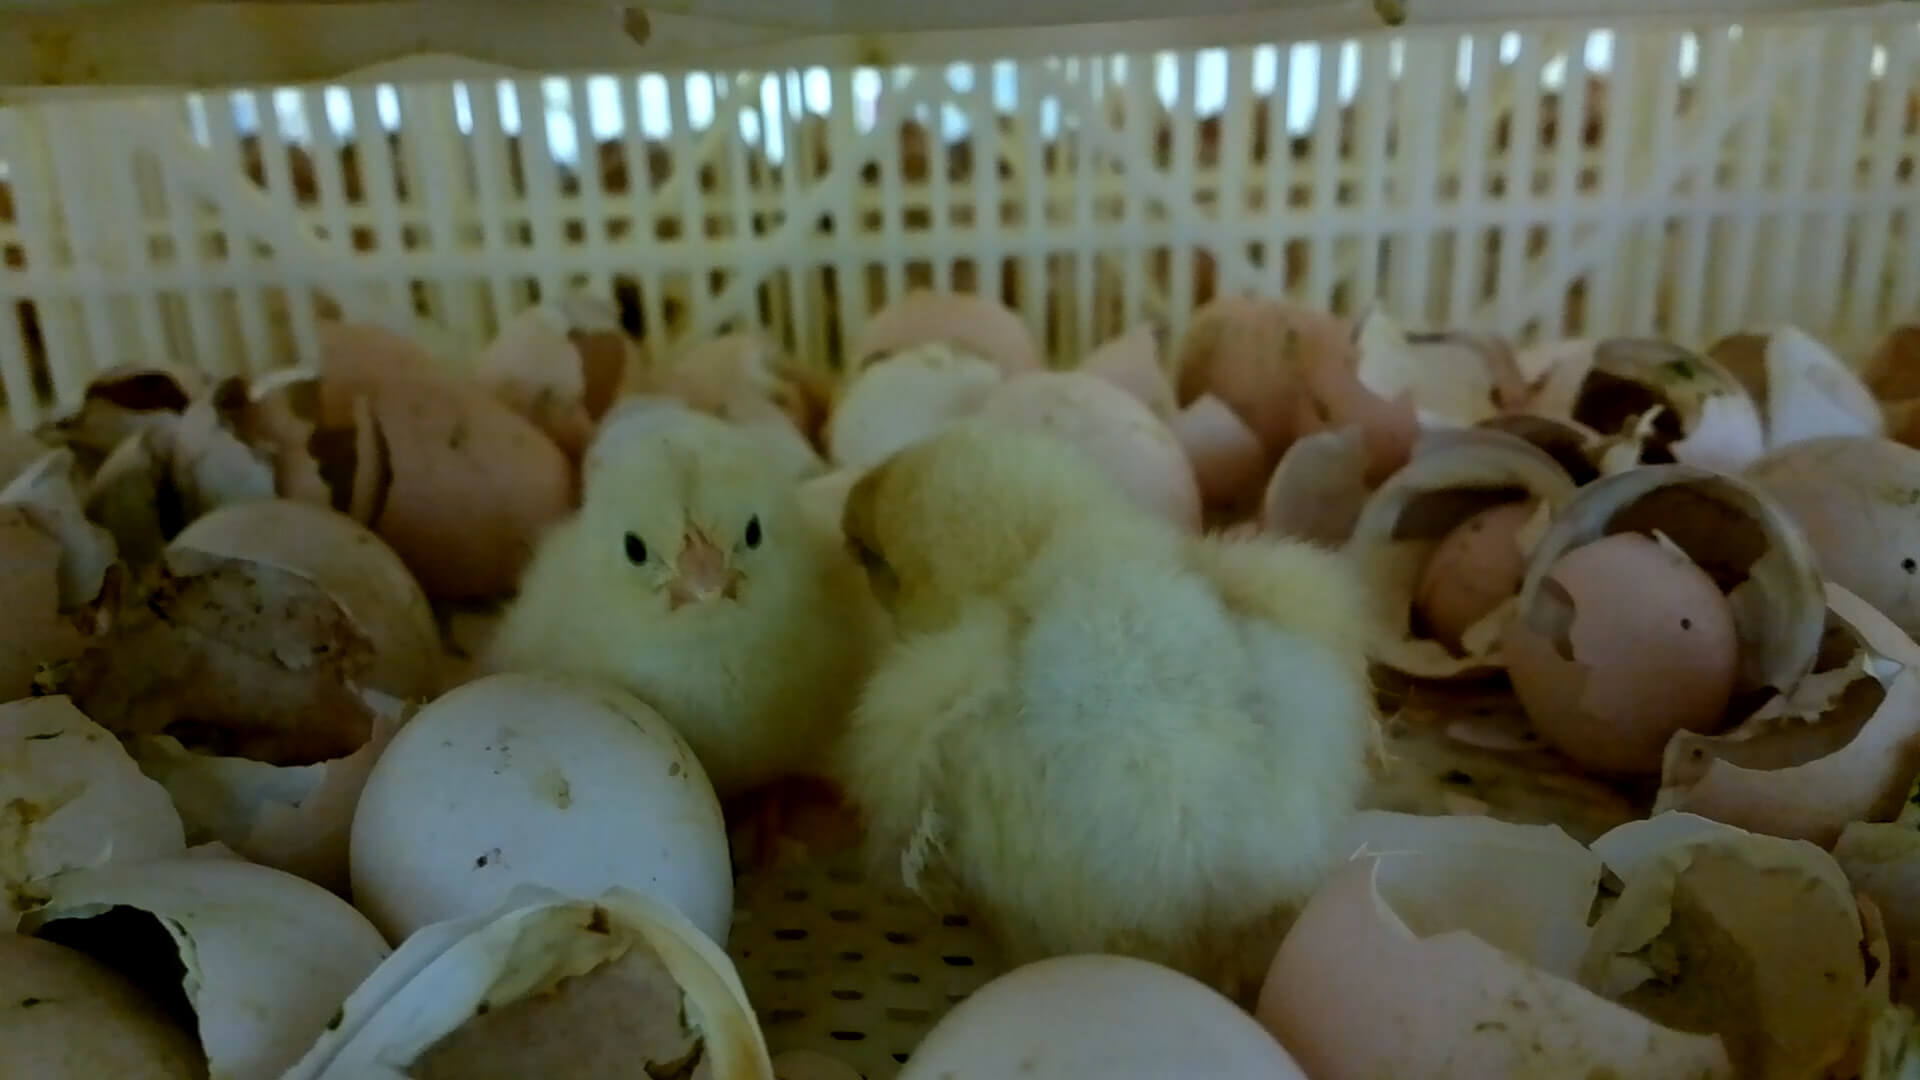 Exposed: Chicks Ground Up Alive at Well-Known Chicken Supplier